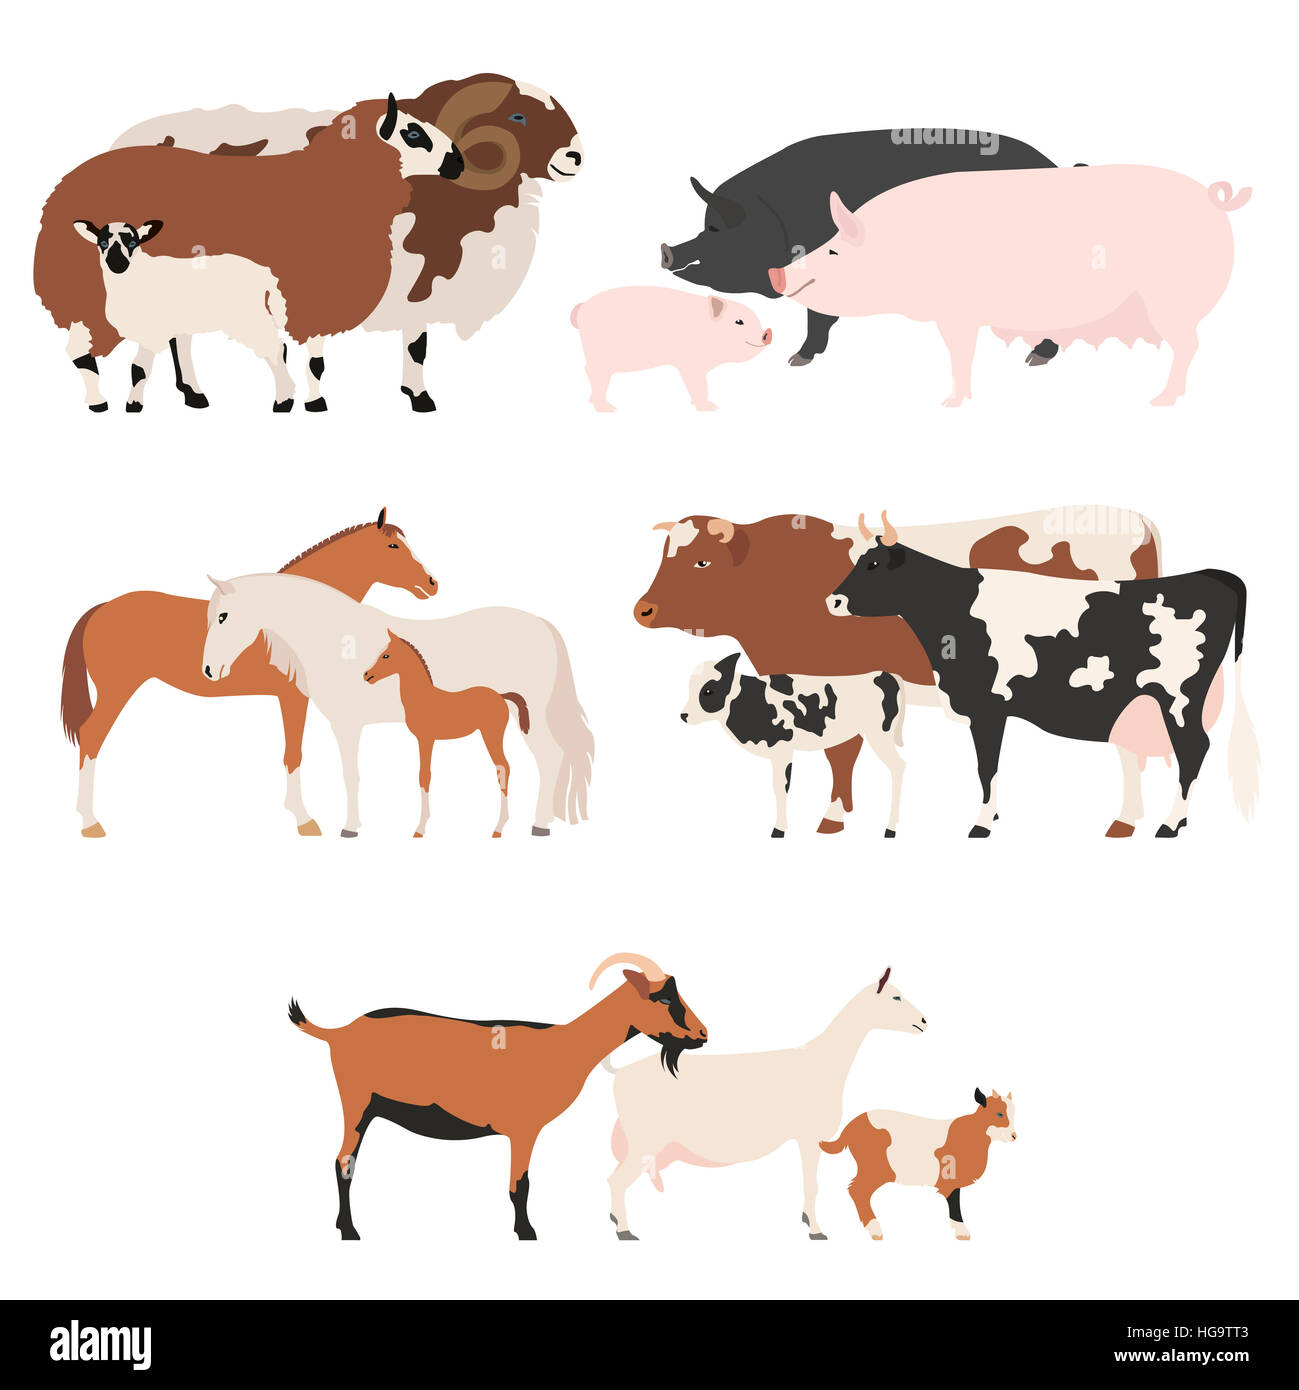 Farm animall family collection. Cattle, sheep, pig, horse, goat icon set. Flat design. Vector illustration Stock Photo